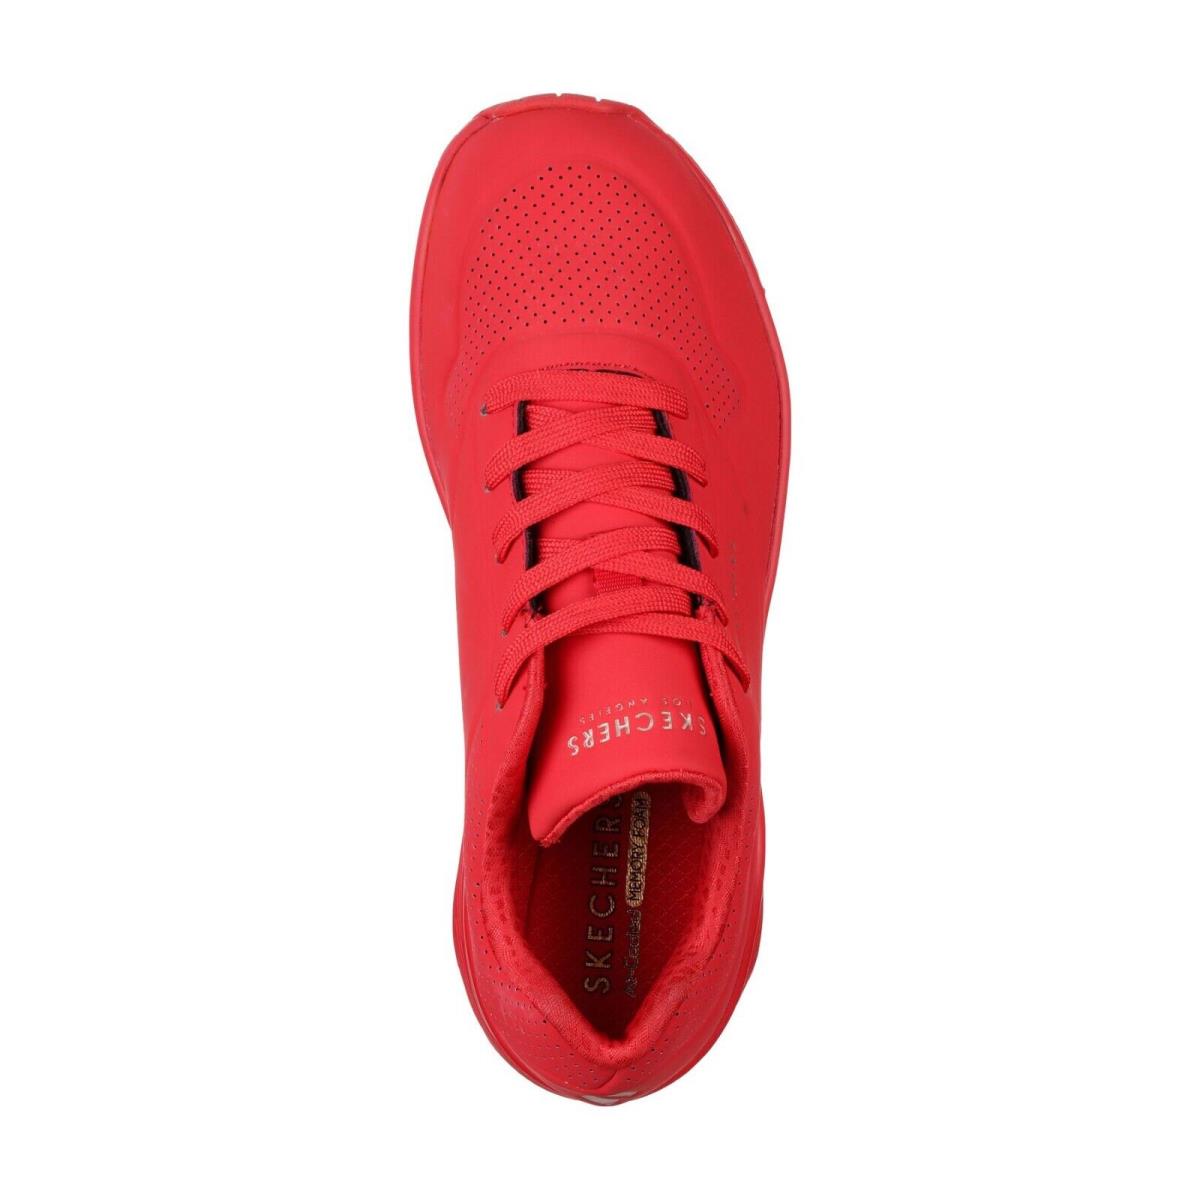 Skechers shoes  - Red 13